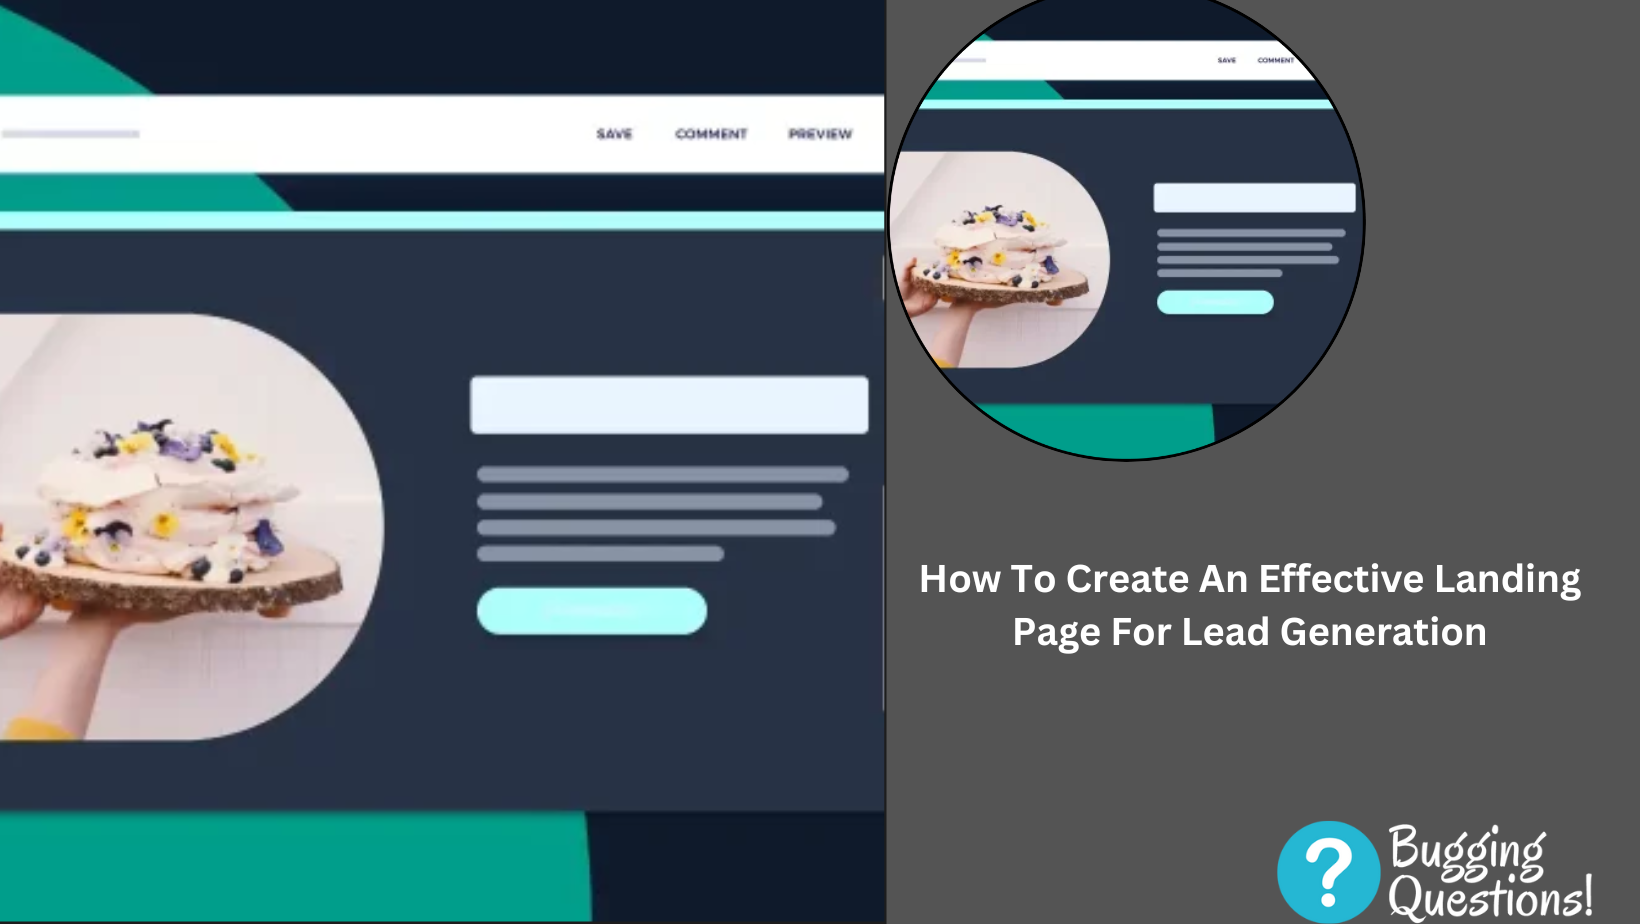 How To Create An Effective Landing Page For Lead Generation